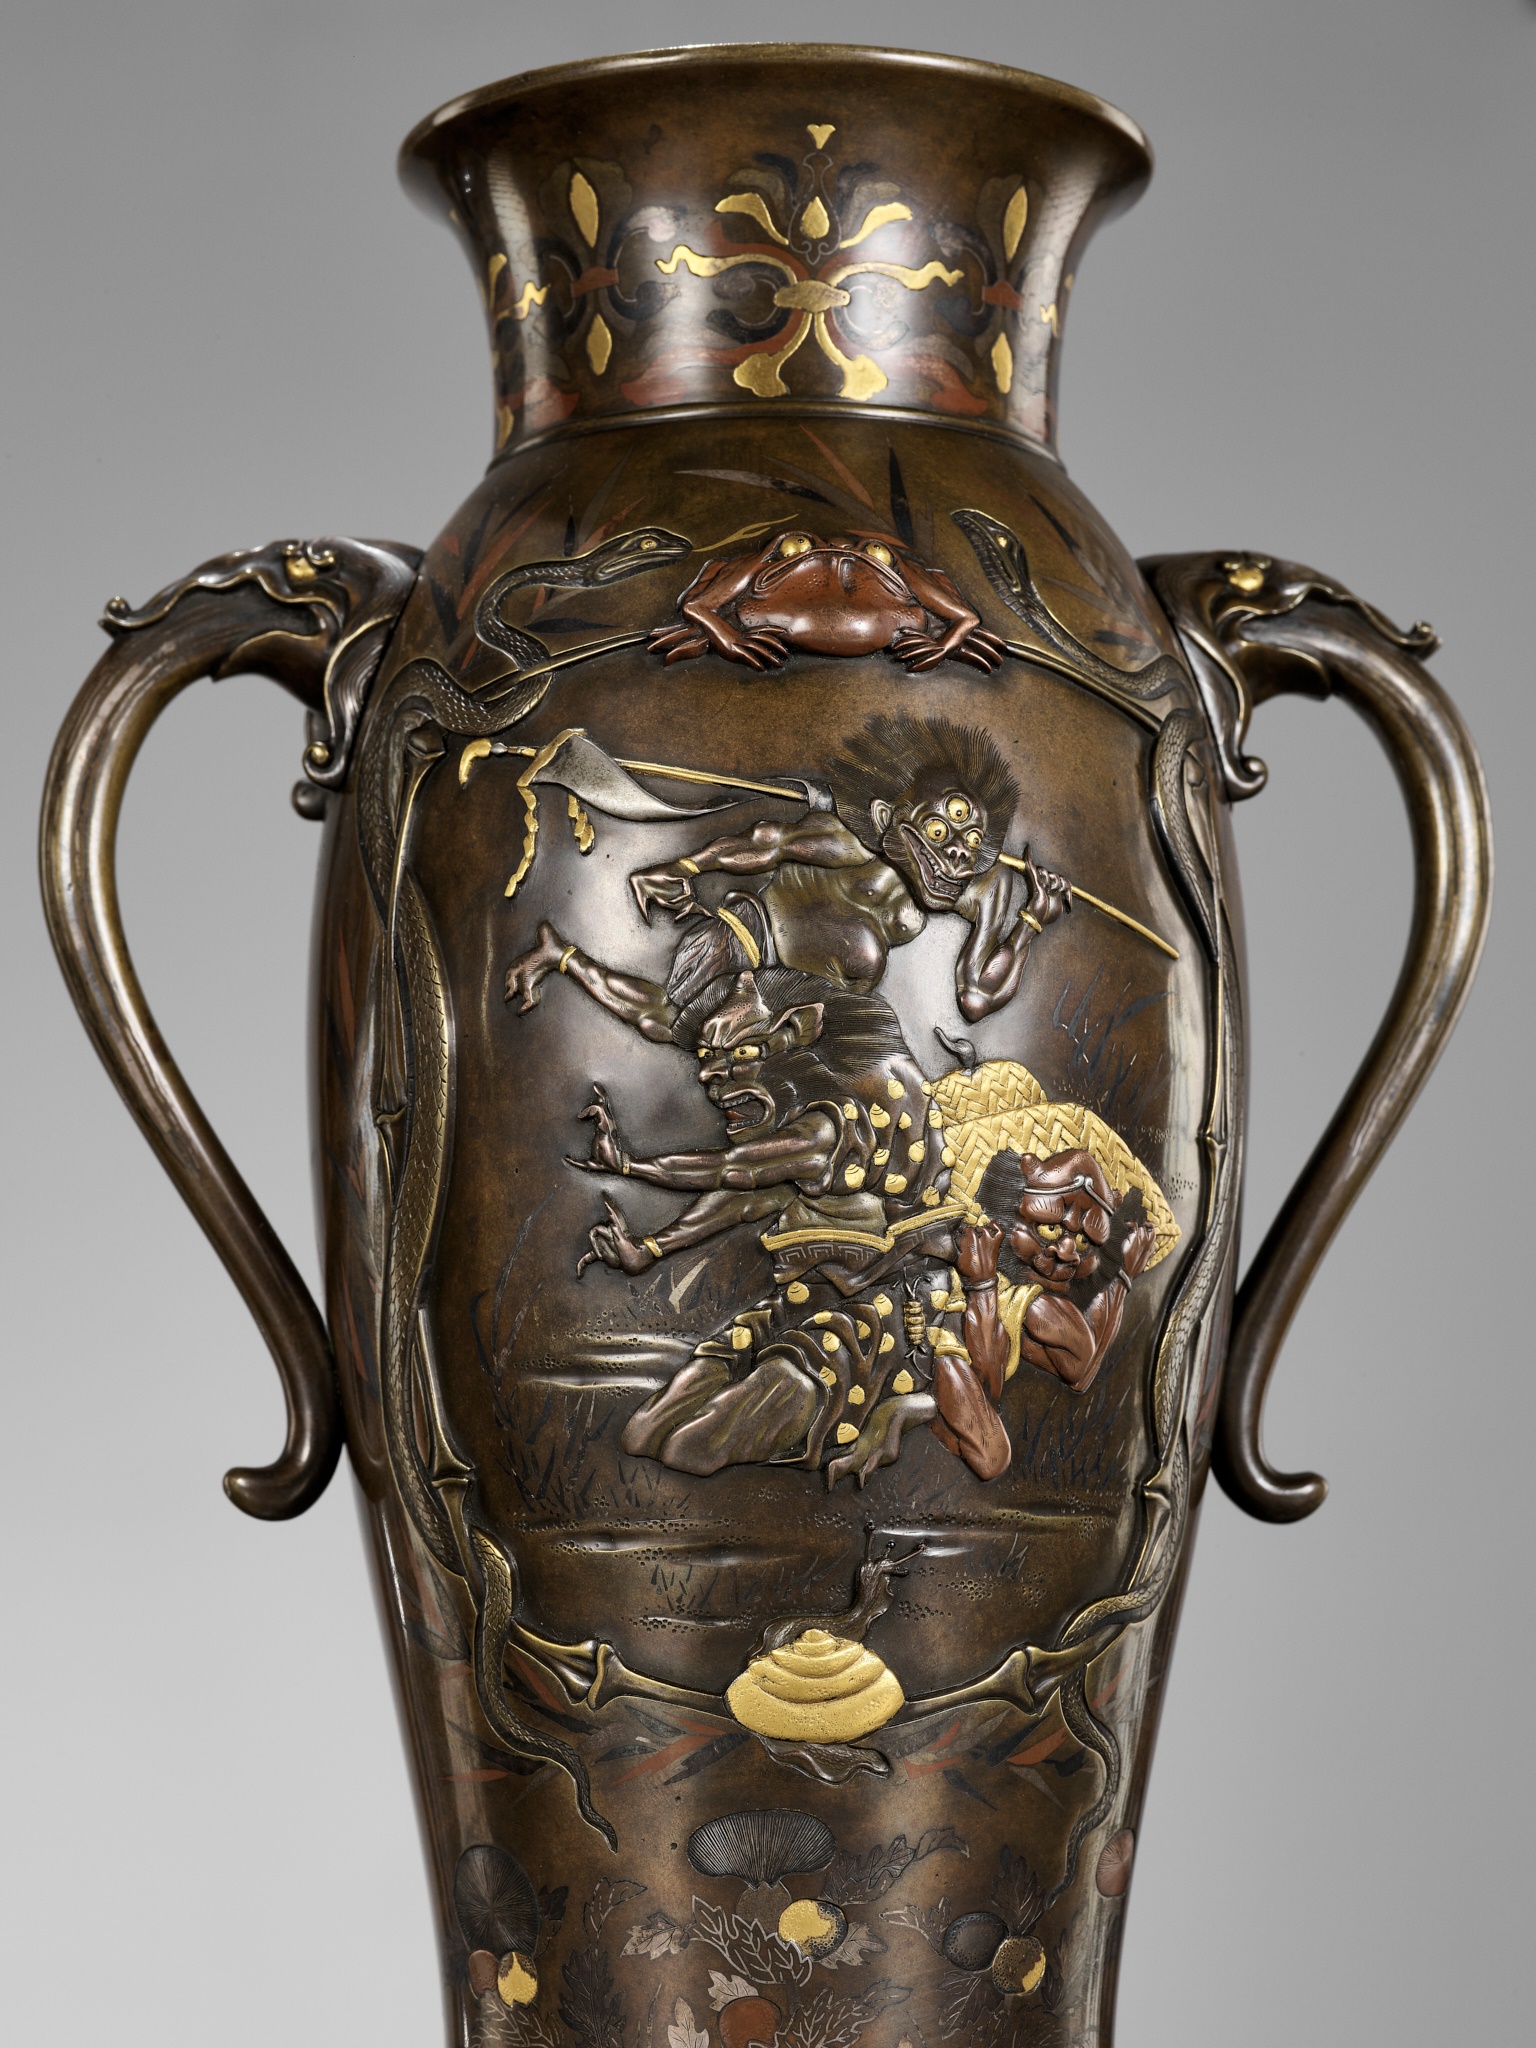 A SUPERB PAIR OF MIYAO-STYLE MIXED-METAL-INLAID AND PARCEL-GILT BRONZE VASES WITH SHOKI AND ONI - Image 7 of 15